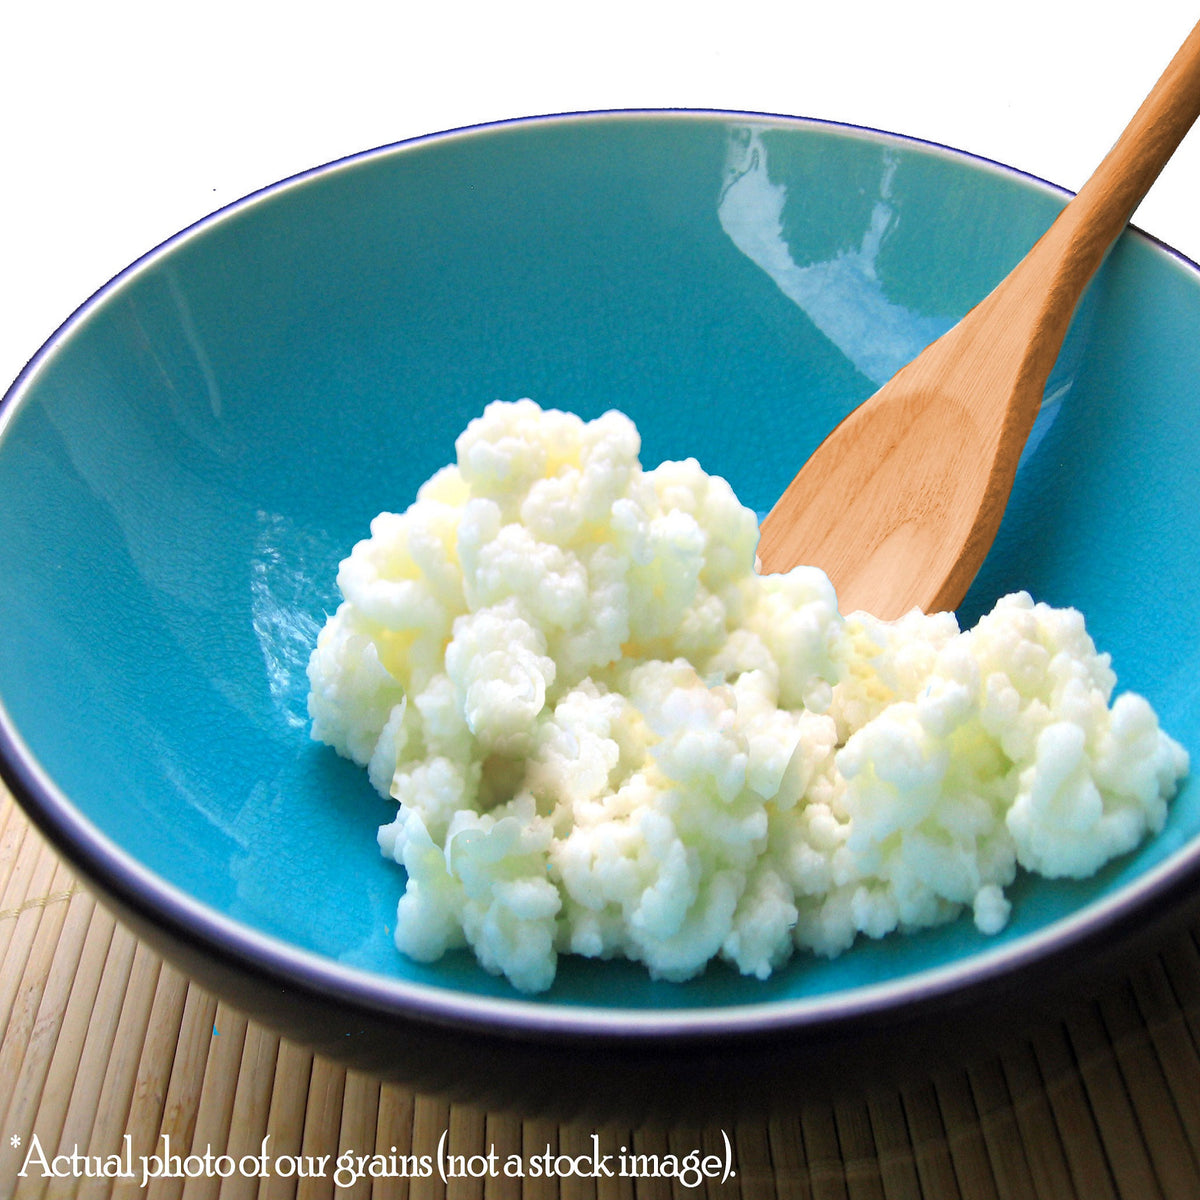 KEFIR GRAINS: What are, How to Store Them - Freak of Natural